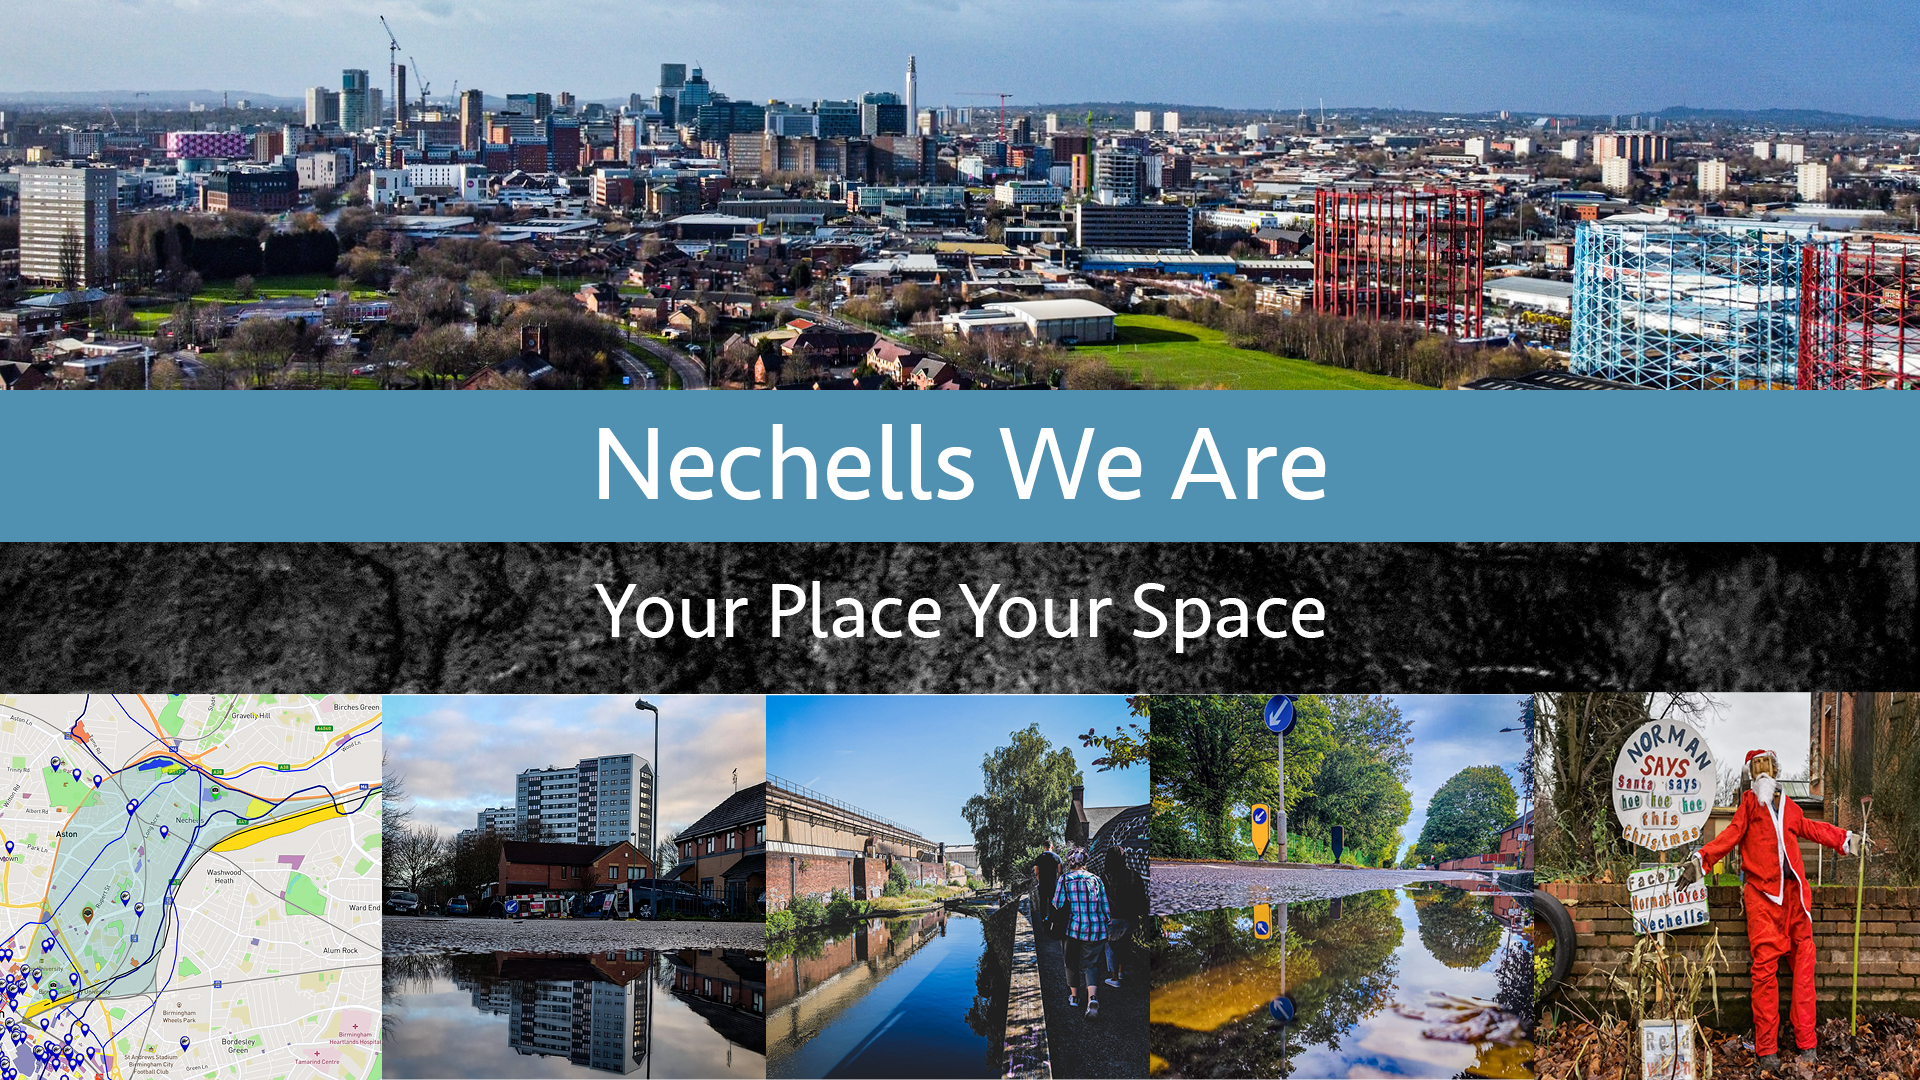 Nechells We Are - an initiative of YourPlaceYourSpace